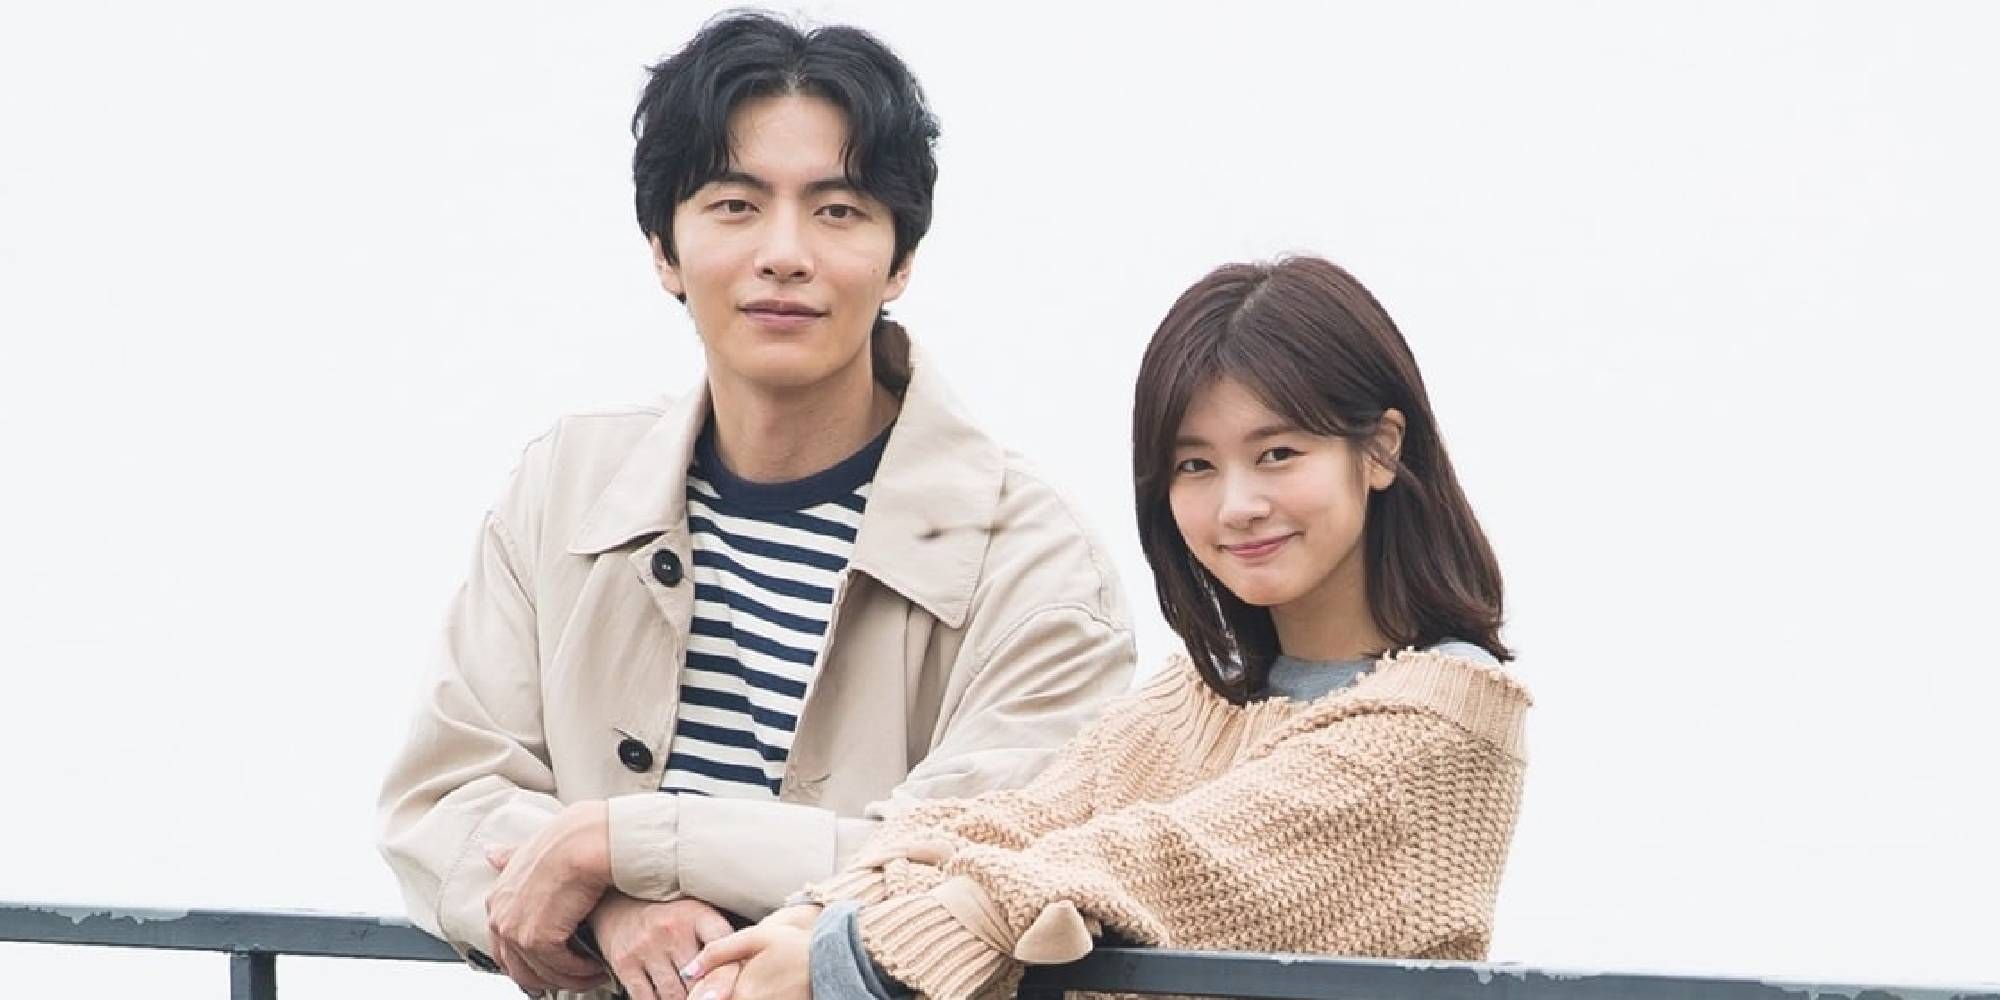 Lee Min Ki and Jung So-min in Because This is My First Life smiling while looking at the camera